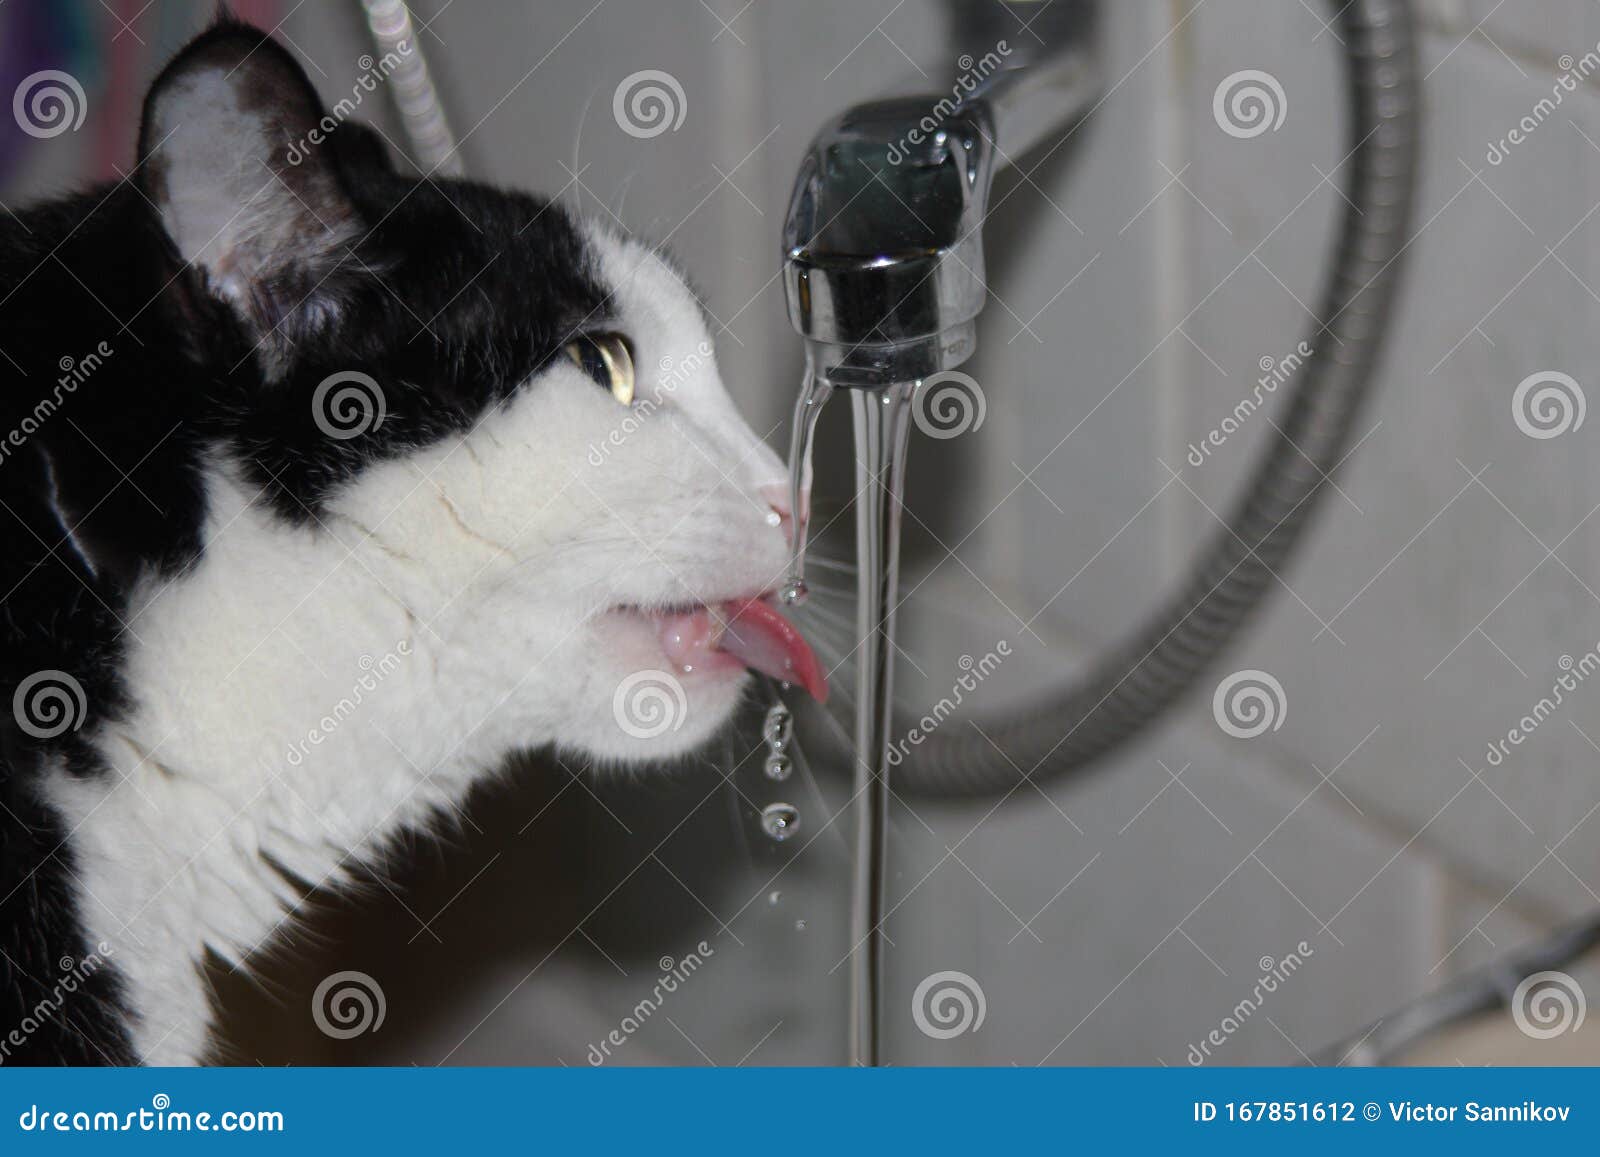 Cat Drinks Water From A Faucet Stock Photo Image Of Sight Drop